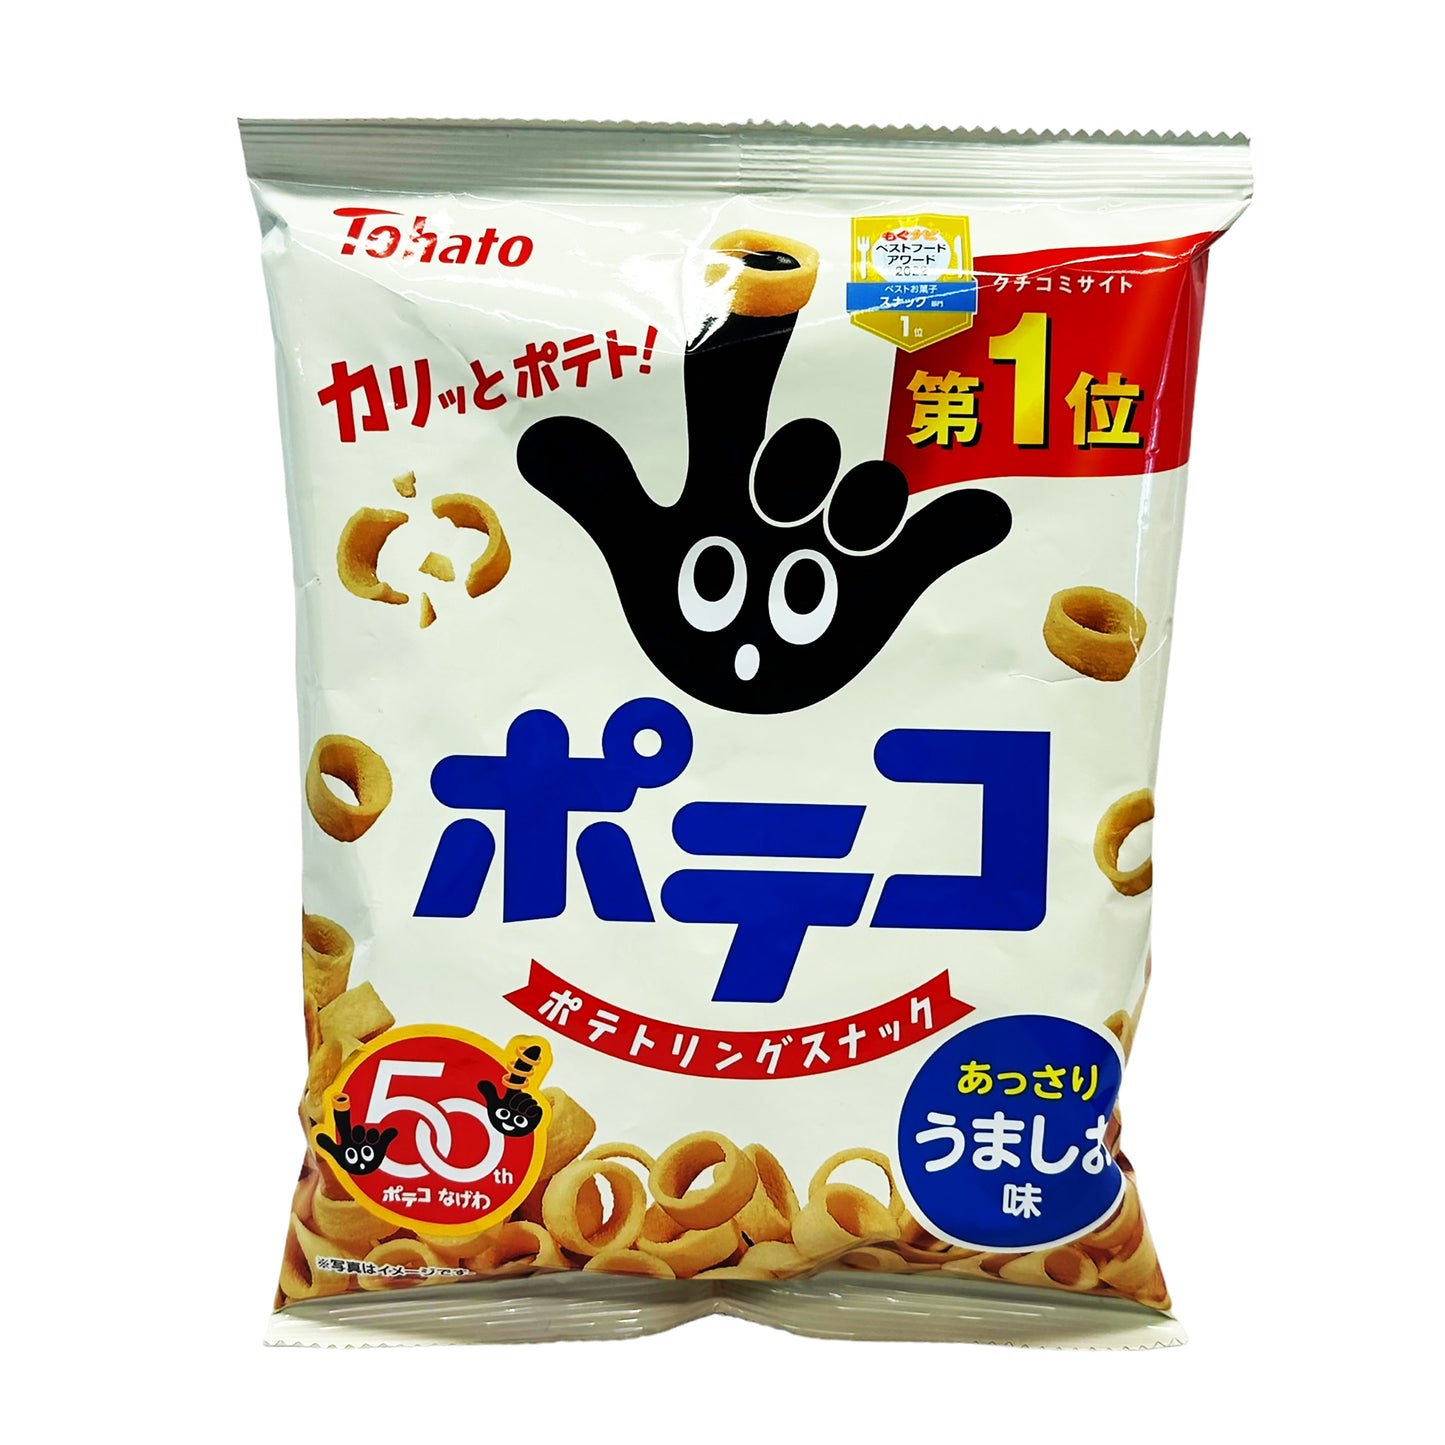 Front graphic image of Tohato Potato Ring Snack 2.4oz (70g)